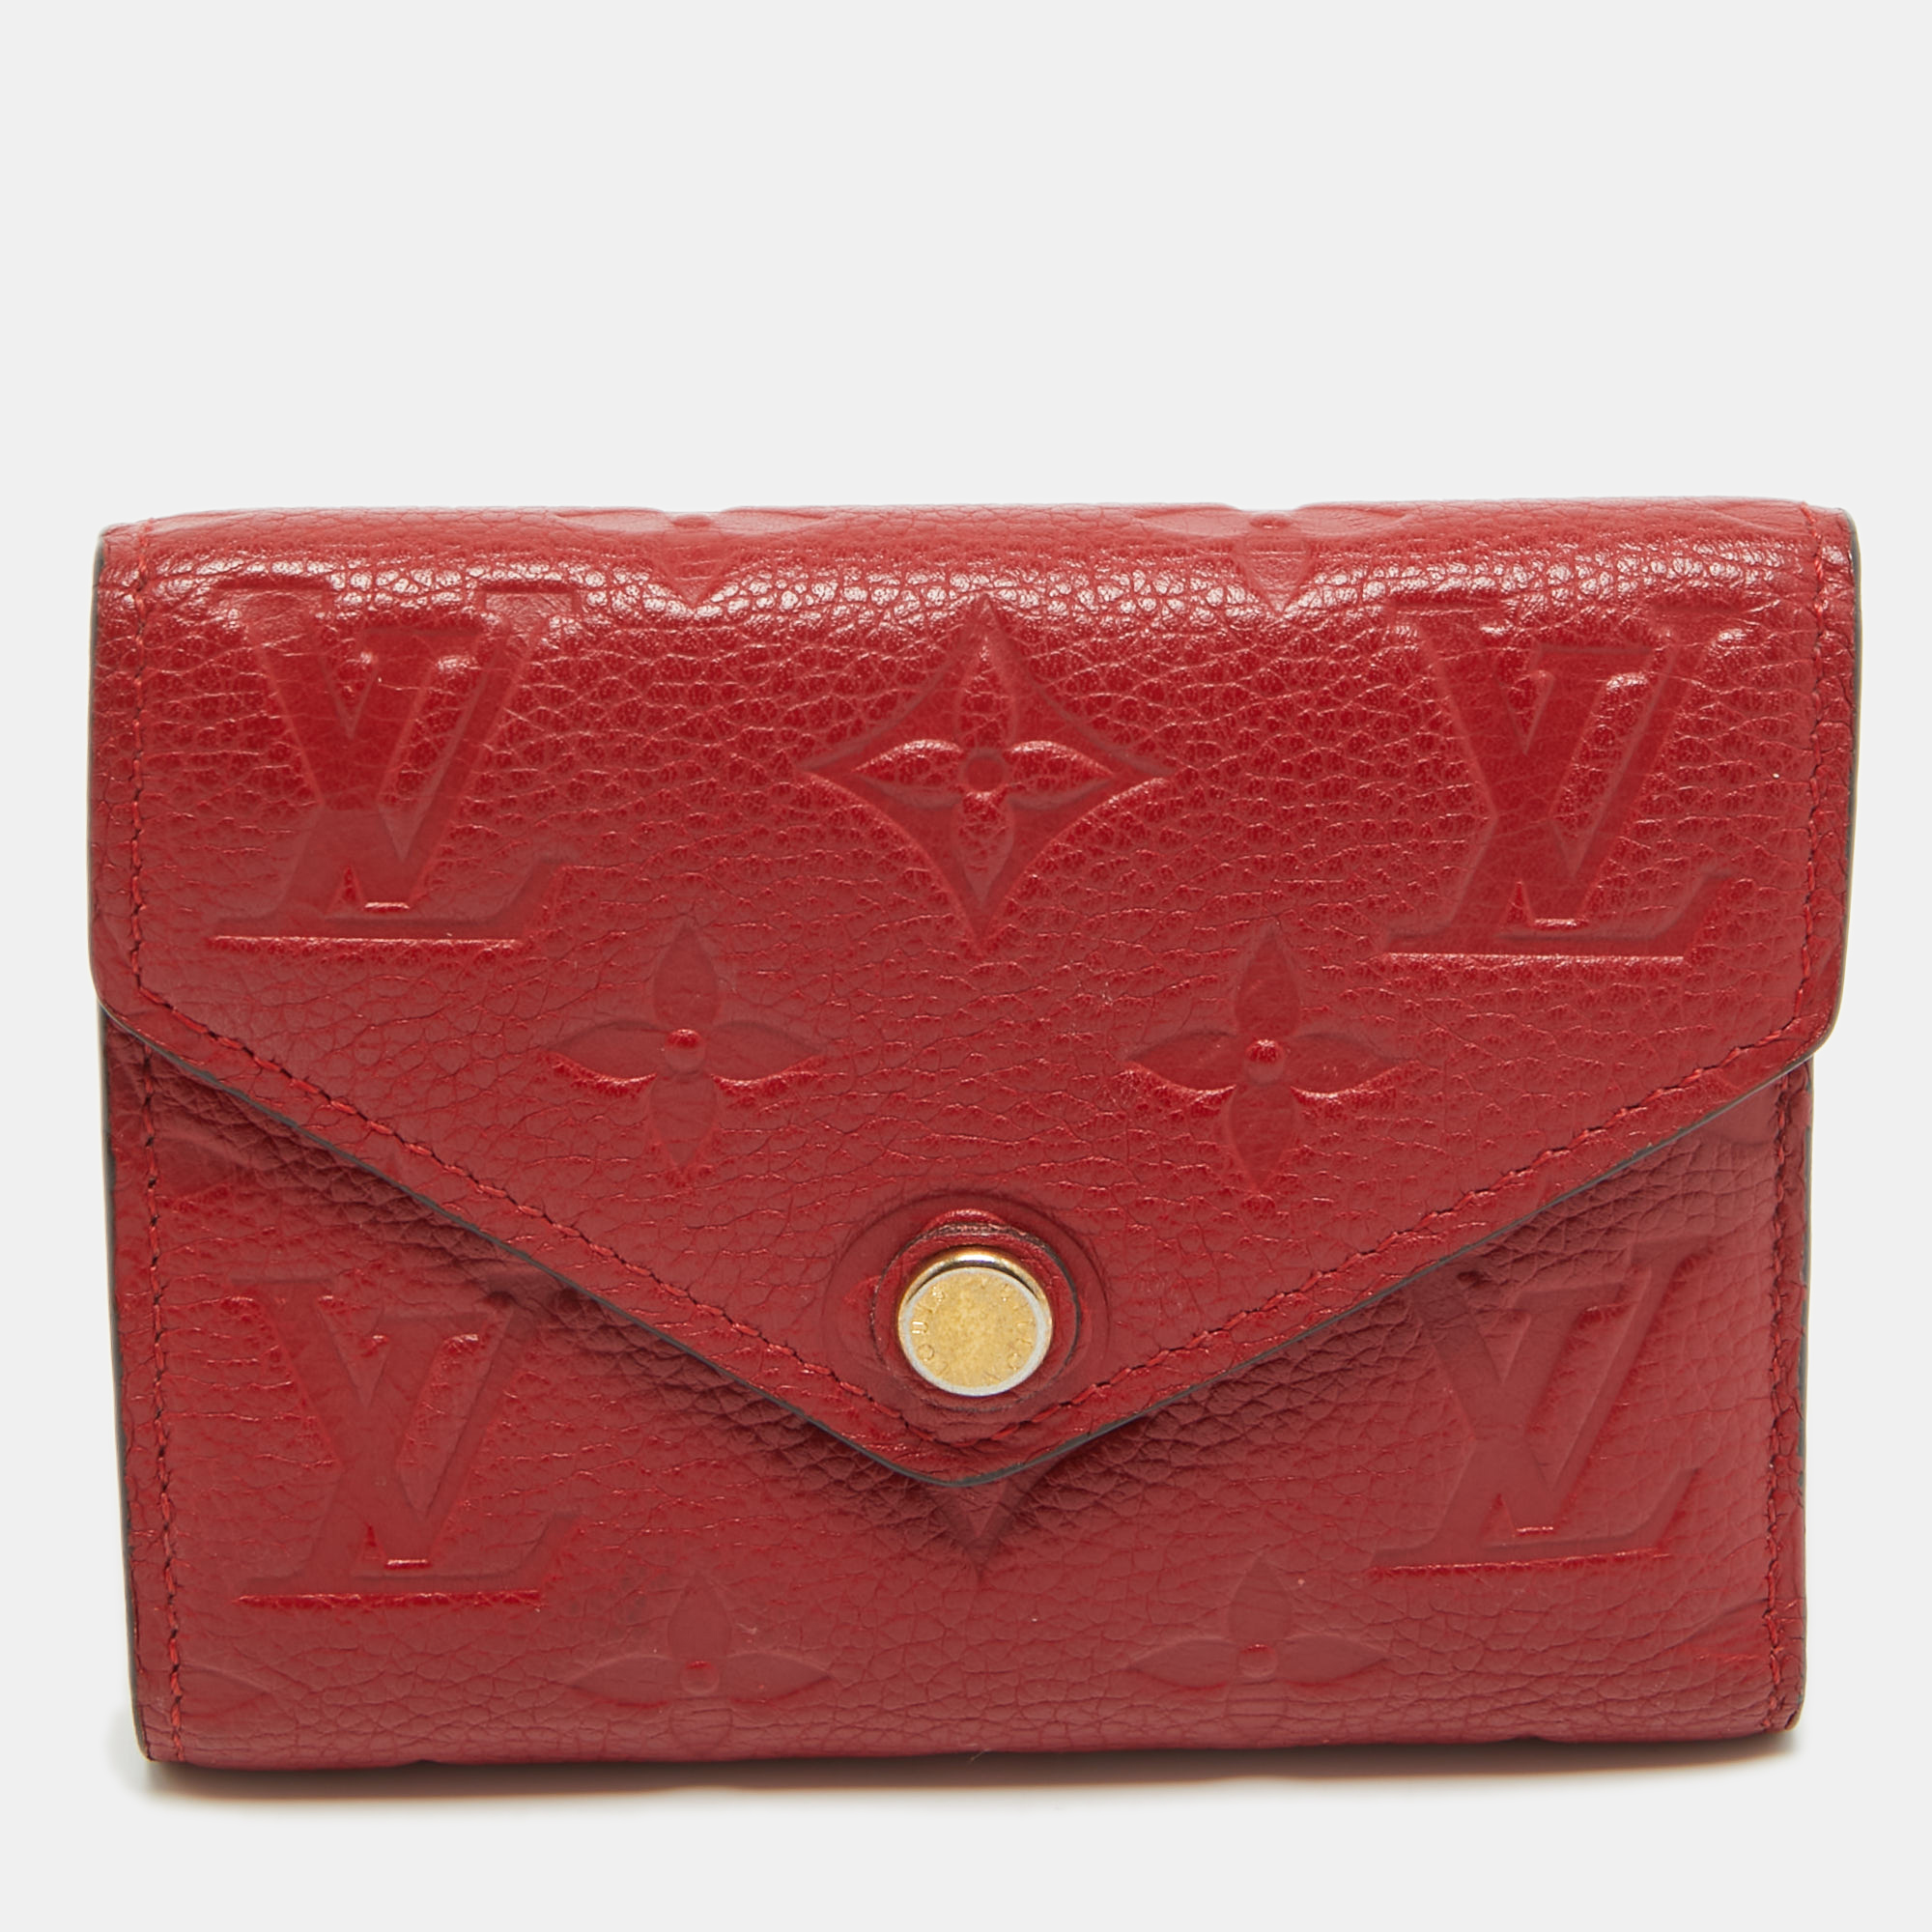 Pre-owned Louis Vuitton Cherry Monogram Empreinte Leather Compact Curieuse Wallet In Red